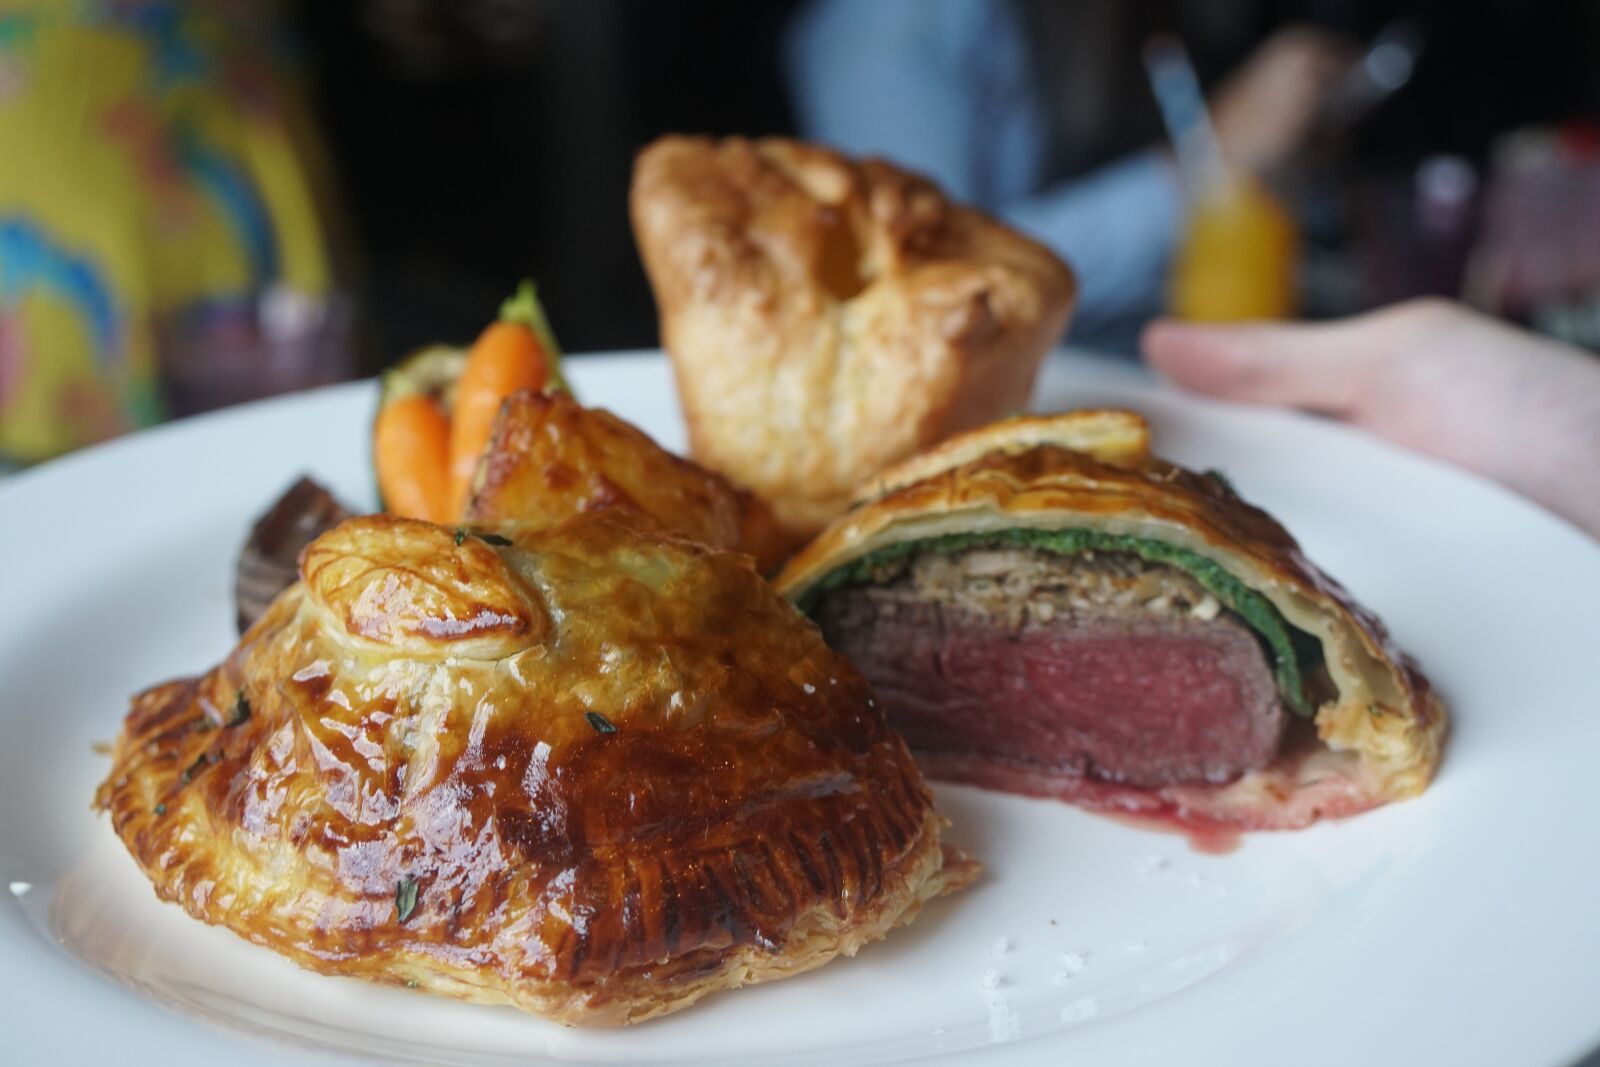 Sony a6500 sample photo. Beef wellington, beef, dinner photography